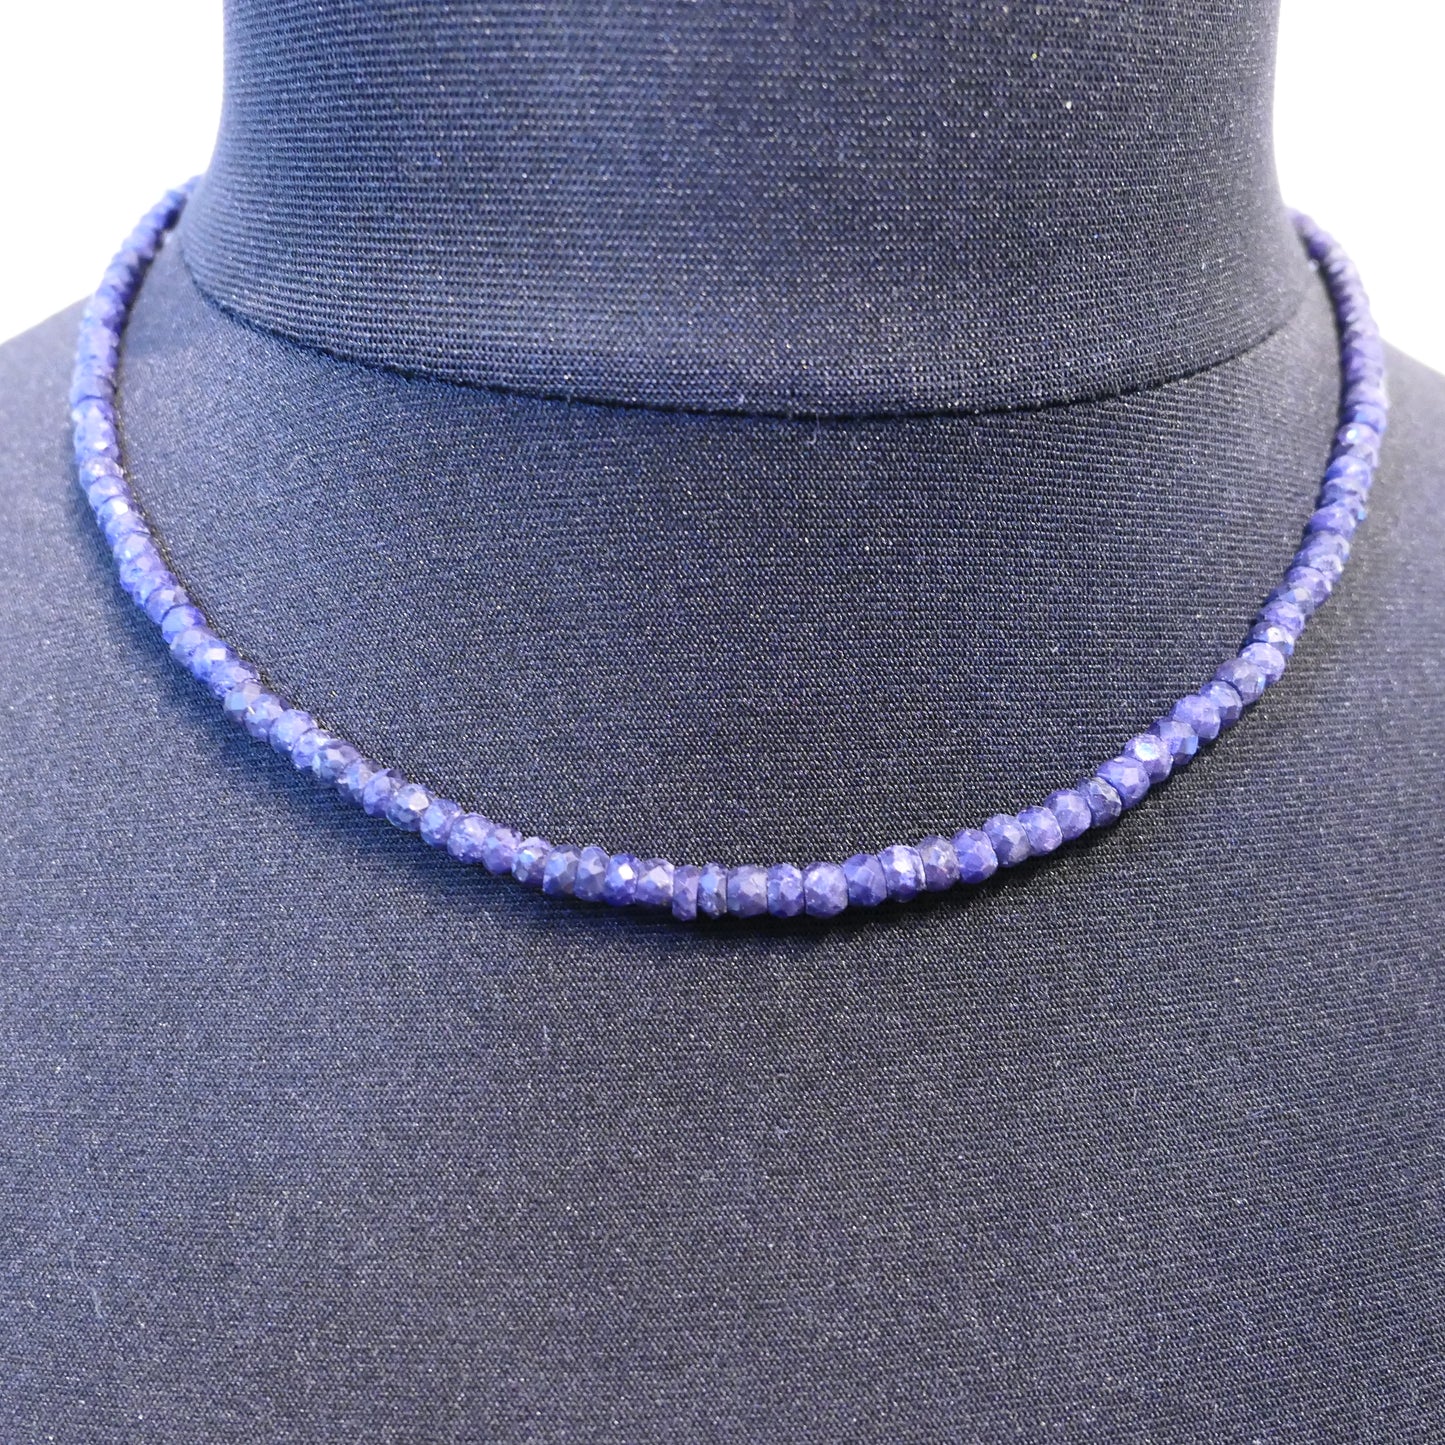 Sapphire Faceted Rondelle Bead Necklace 18"